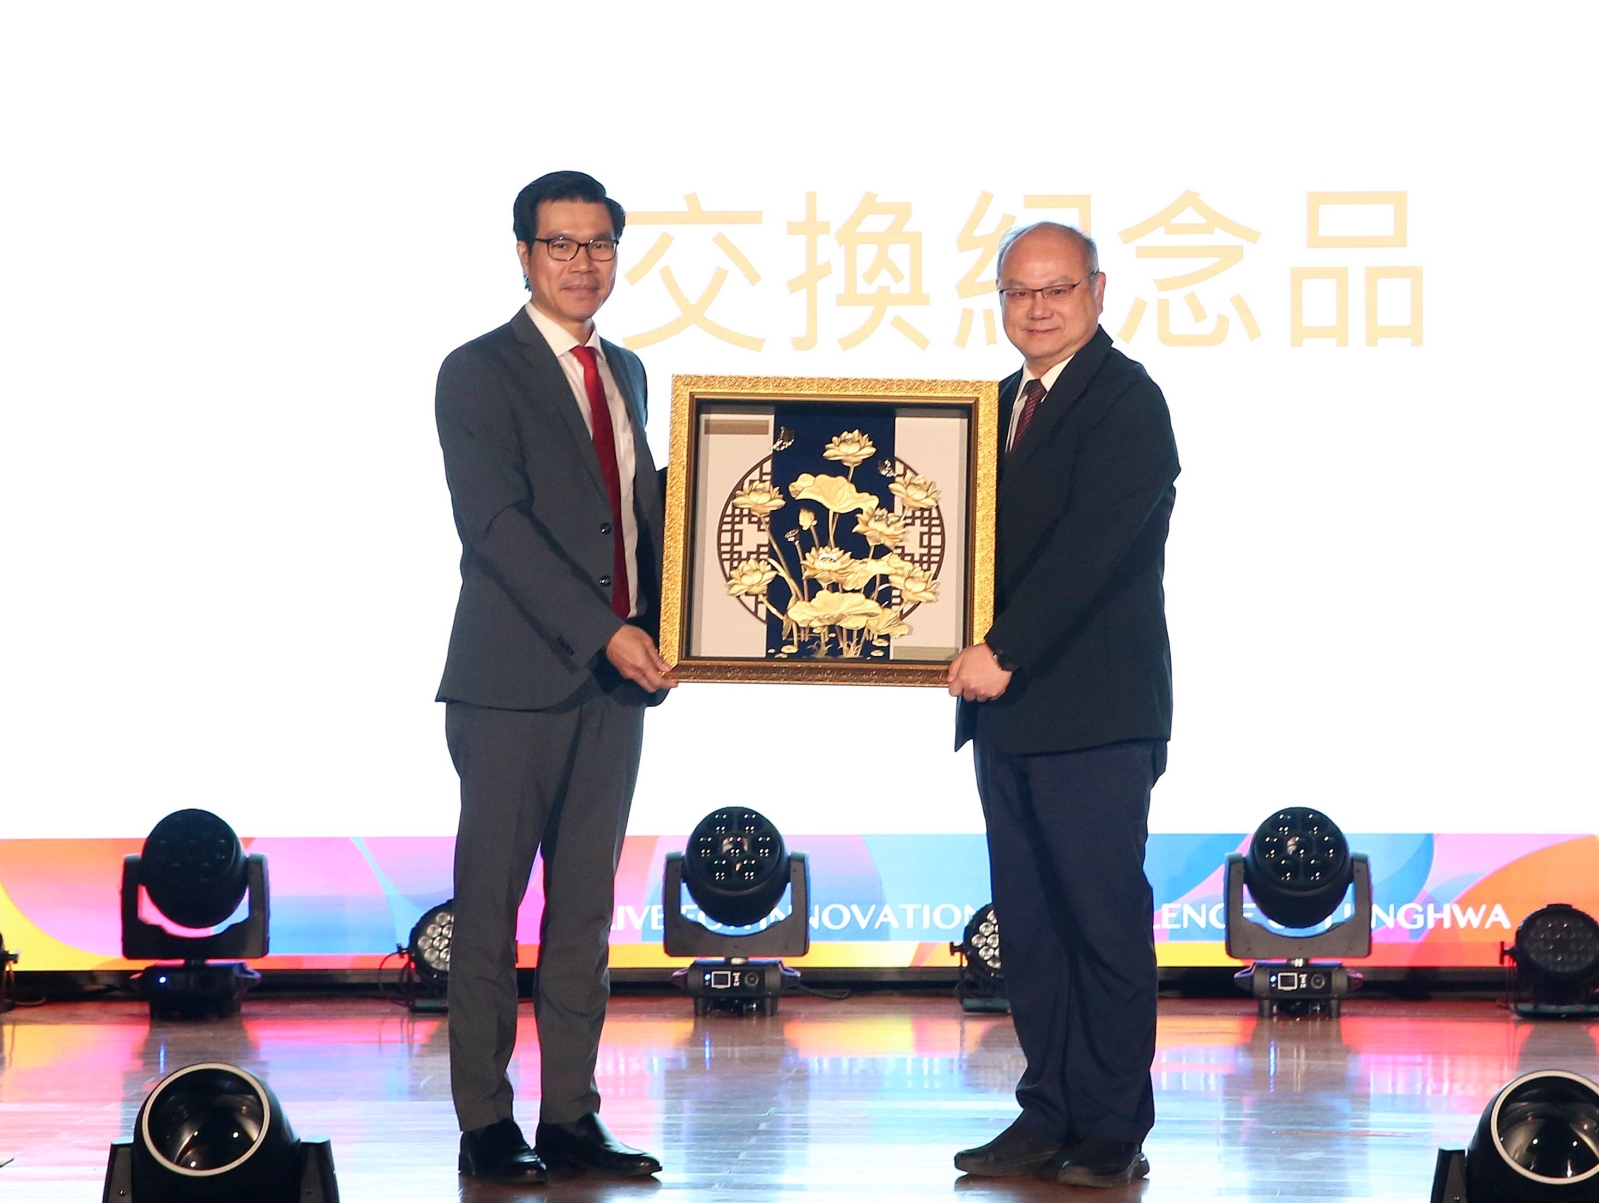 The President of Ton Duc Thang University in Vietnam presented a commemorative gift to Lunghwa.